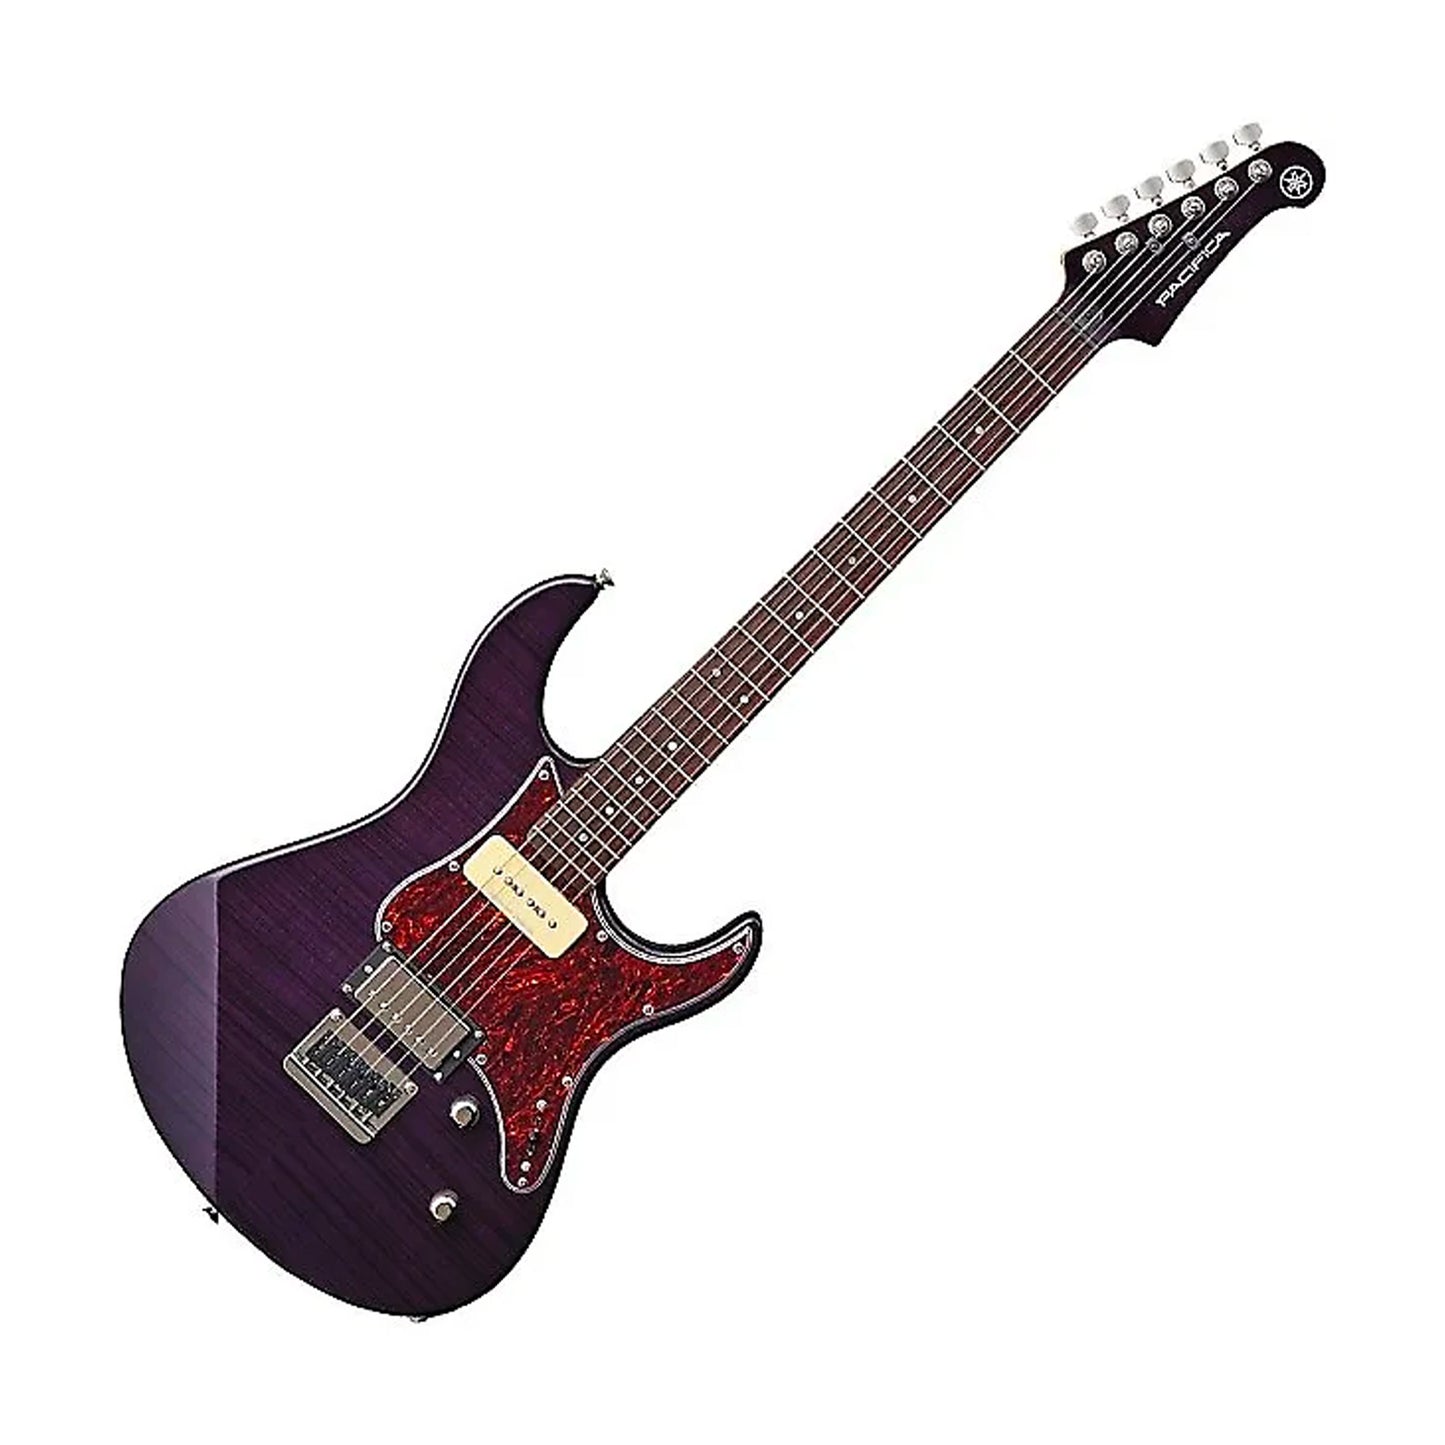 Yamaha PAC611HFM Pacifica Electric Guitar in Translucent Purple